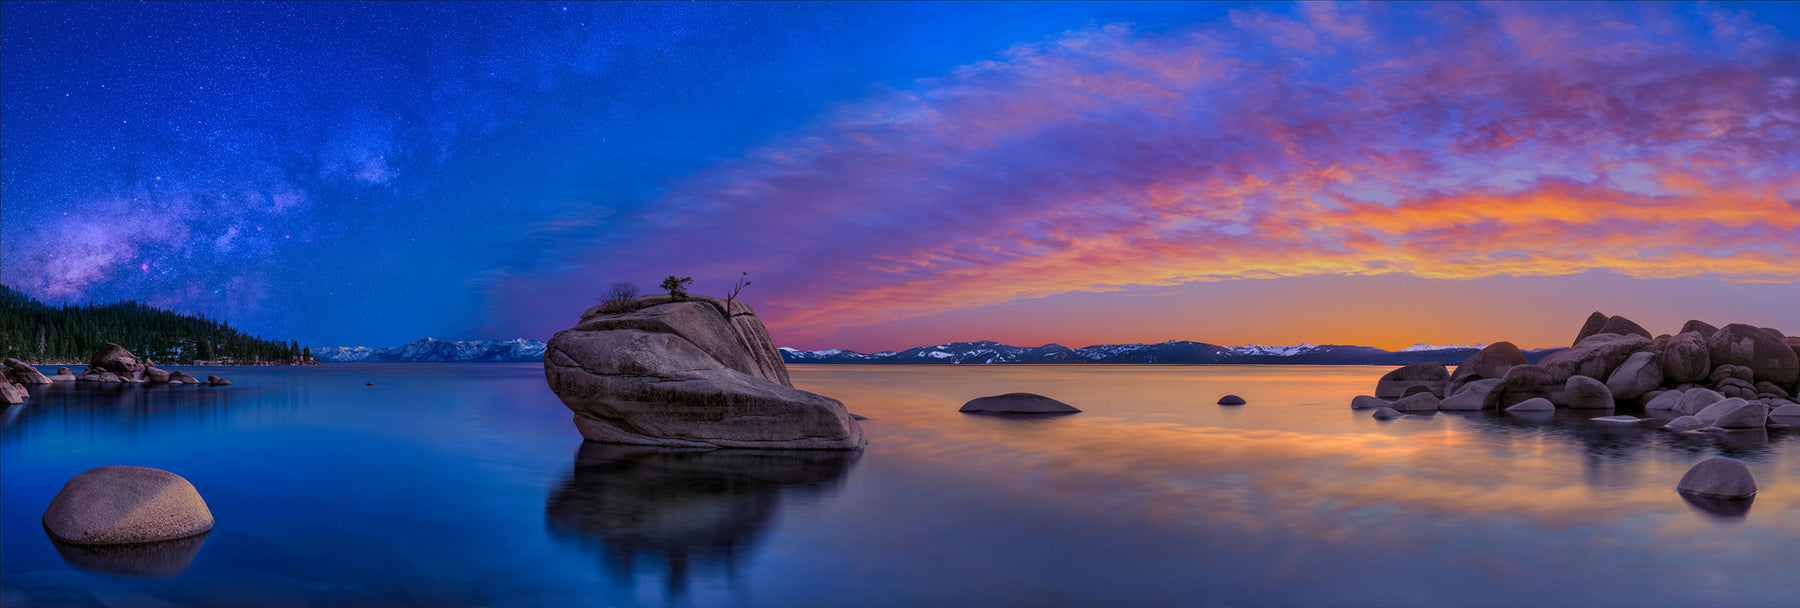 Peter Lik Photograph of Bonzai Rock in Lake Tahoe, as the sun sets and the stars come alive.